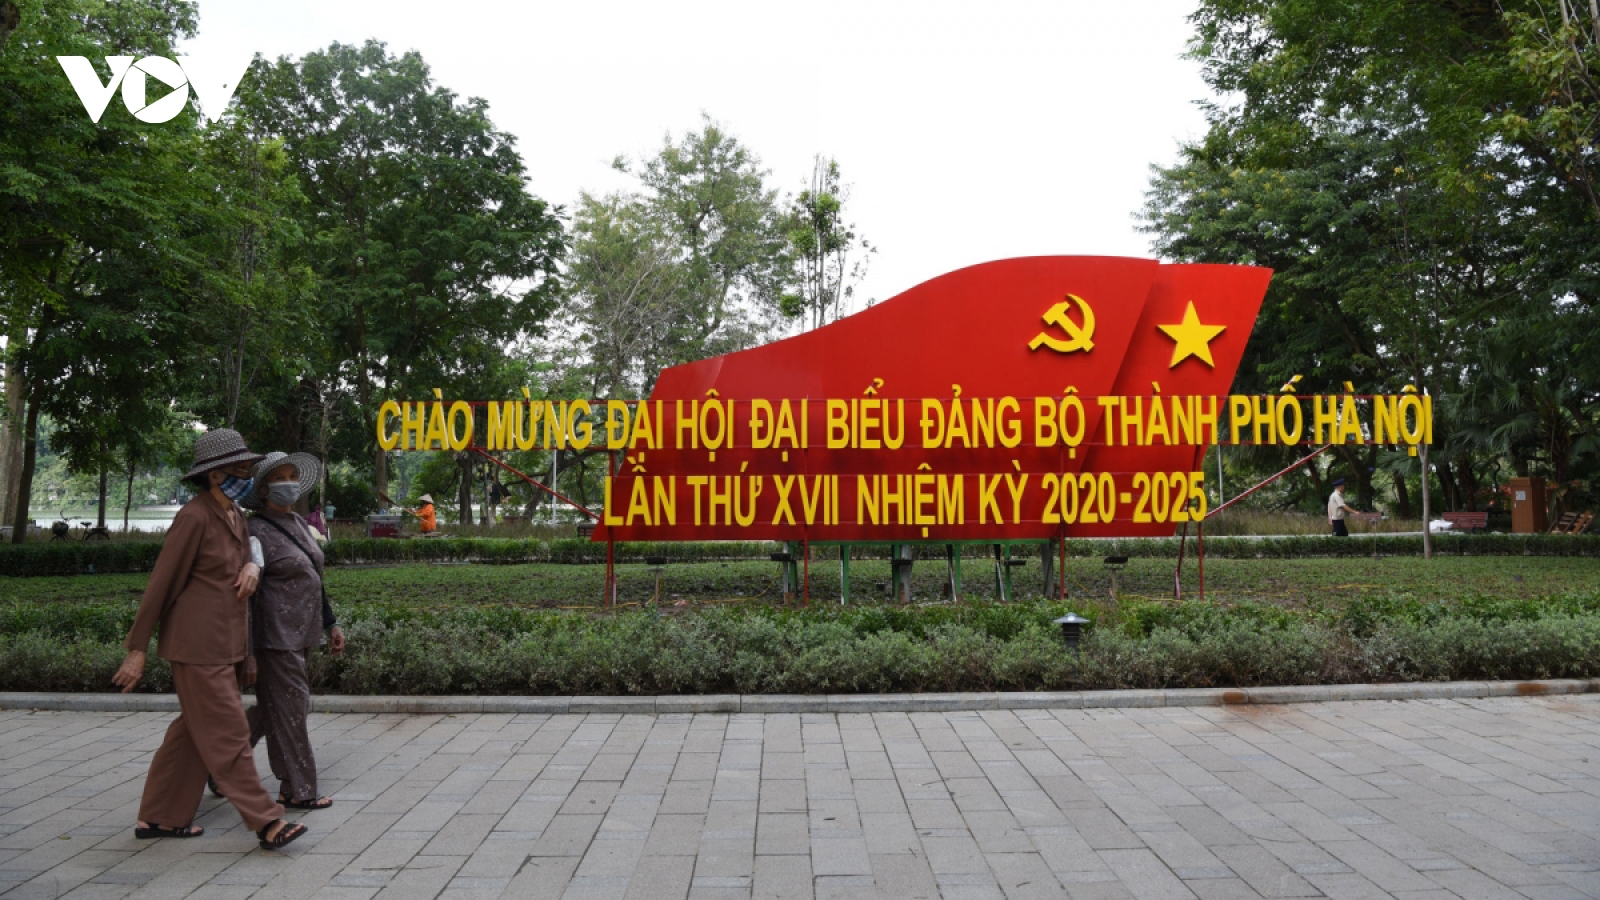 Flags and flowers spotted throughout Hanoi to celebrate major events